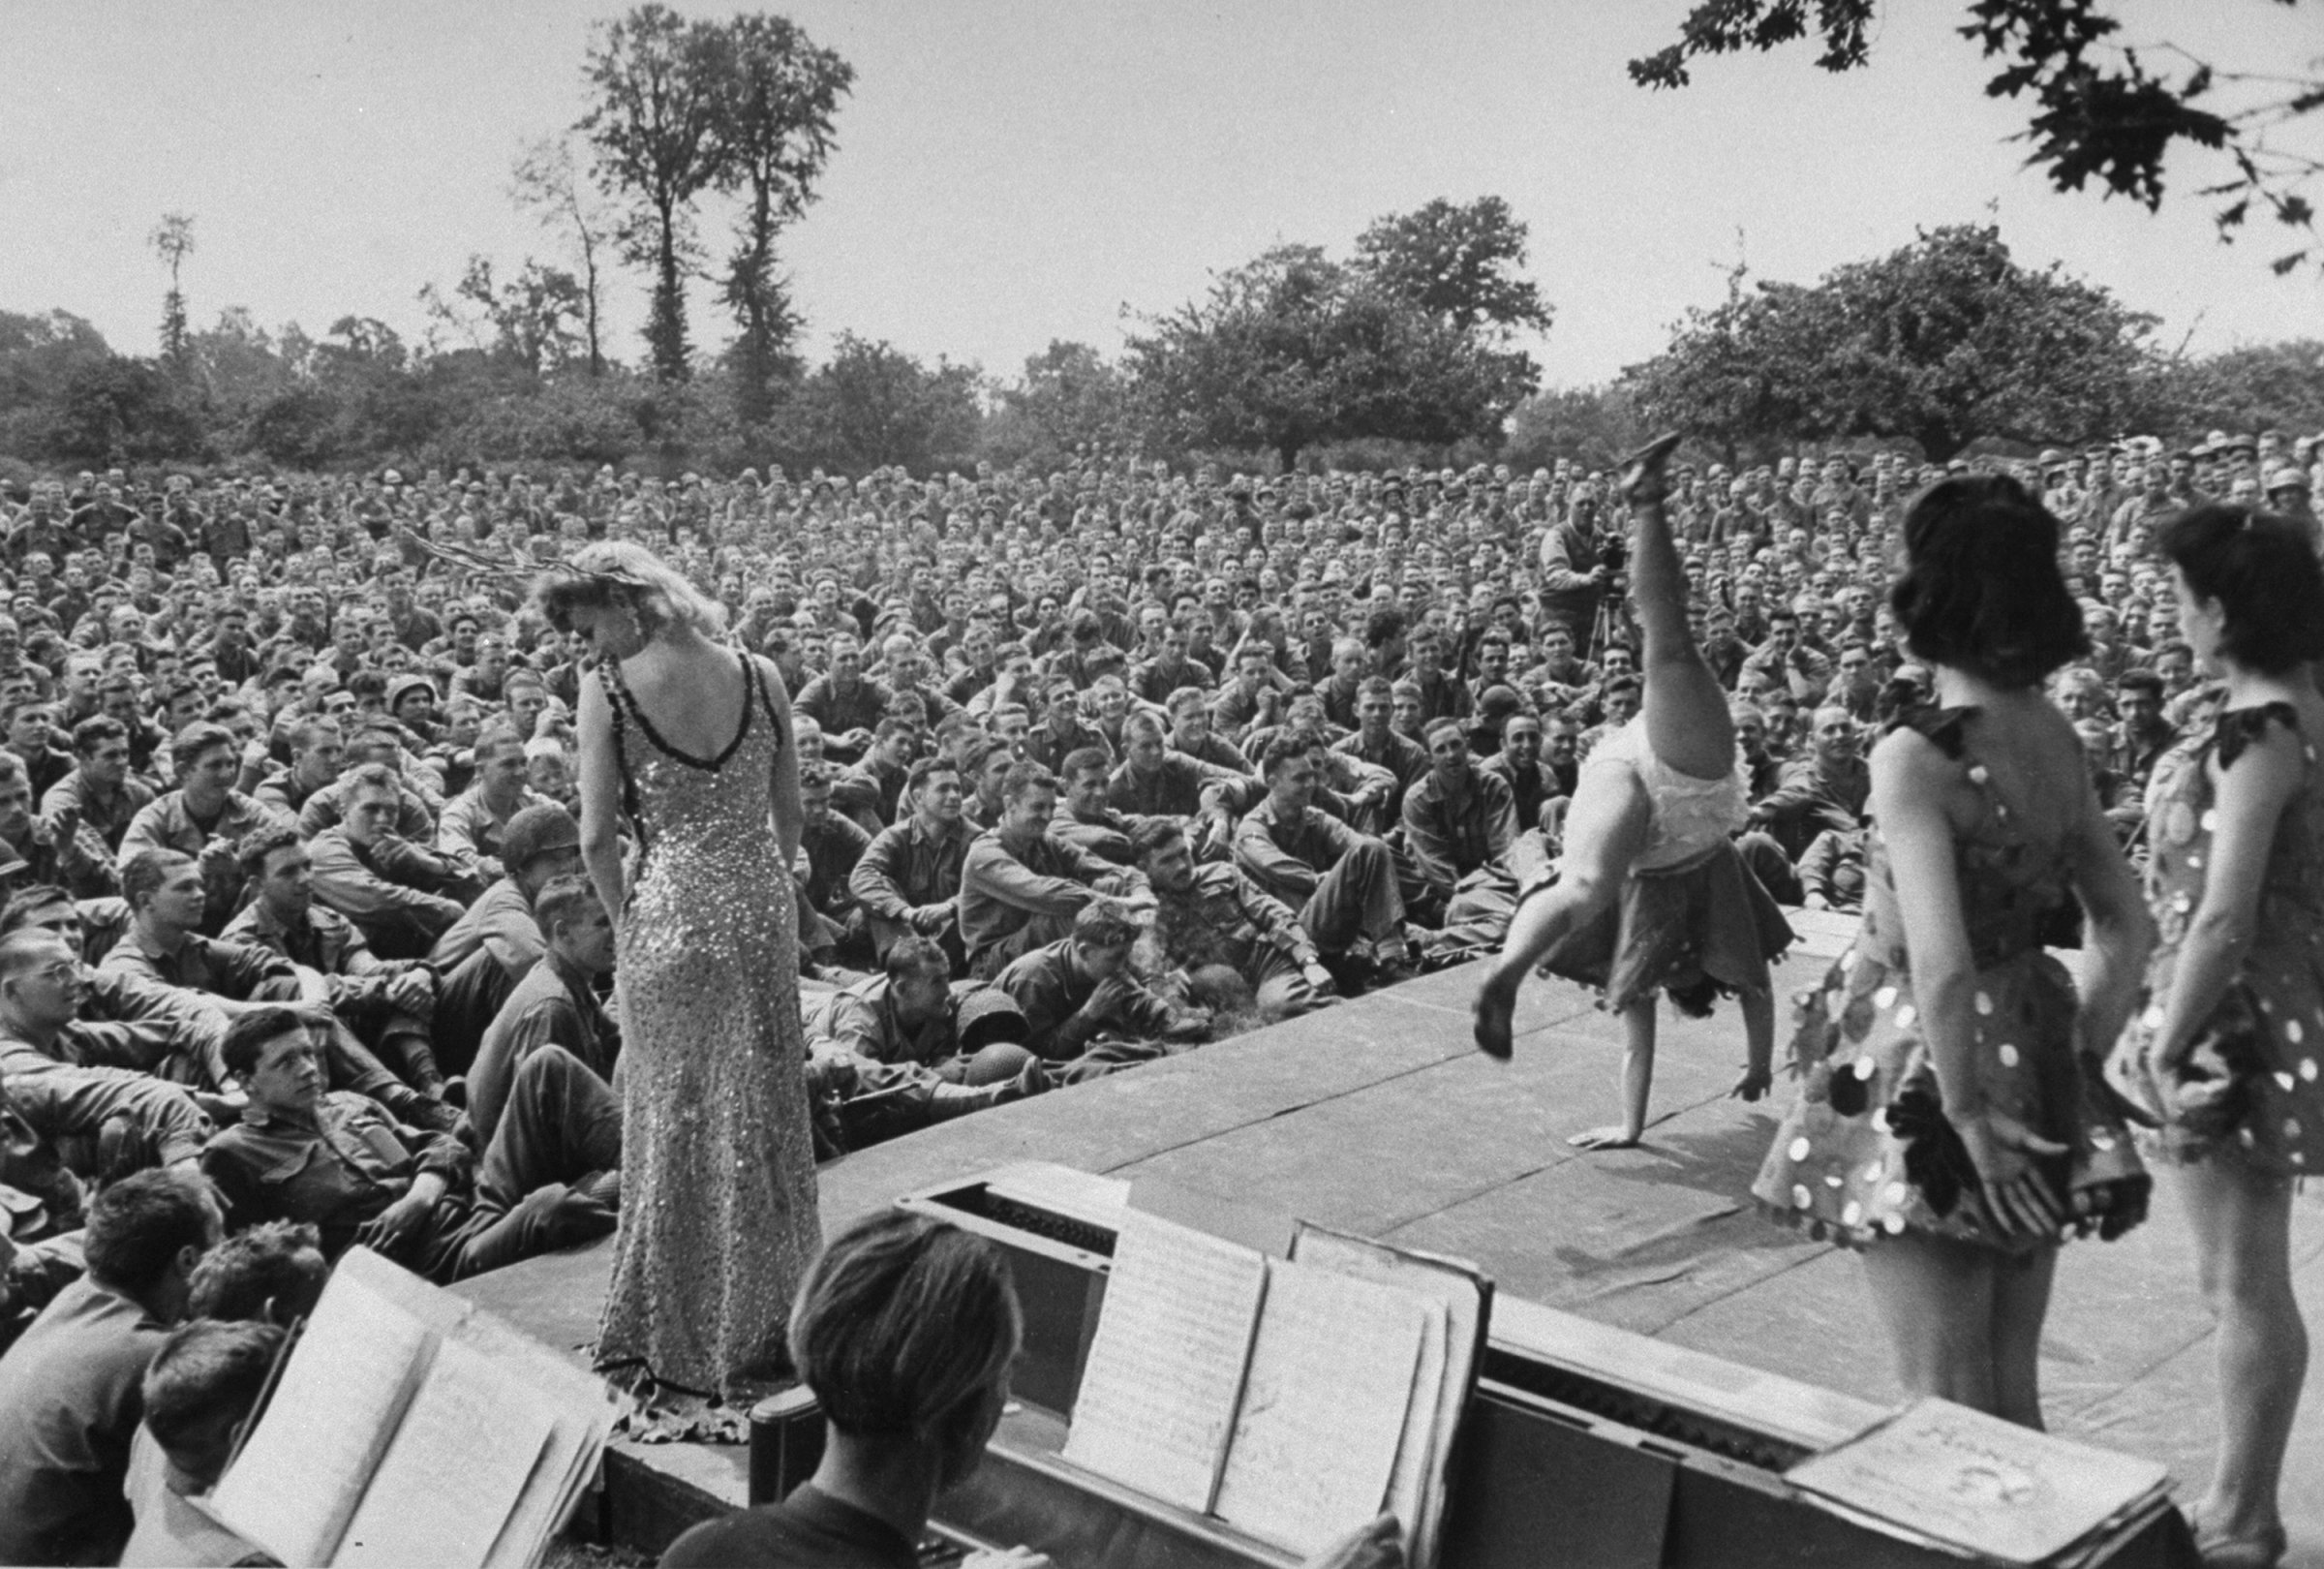 Show for the Troops After D-Day, 1944